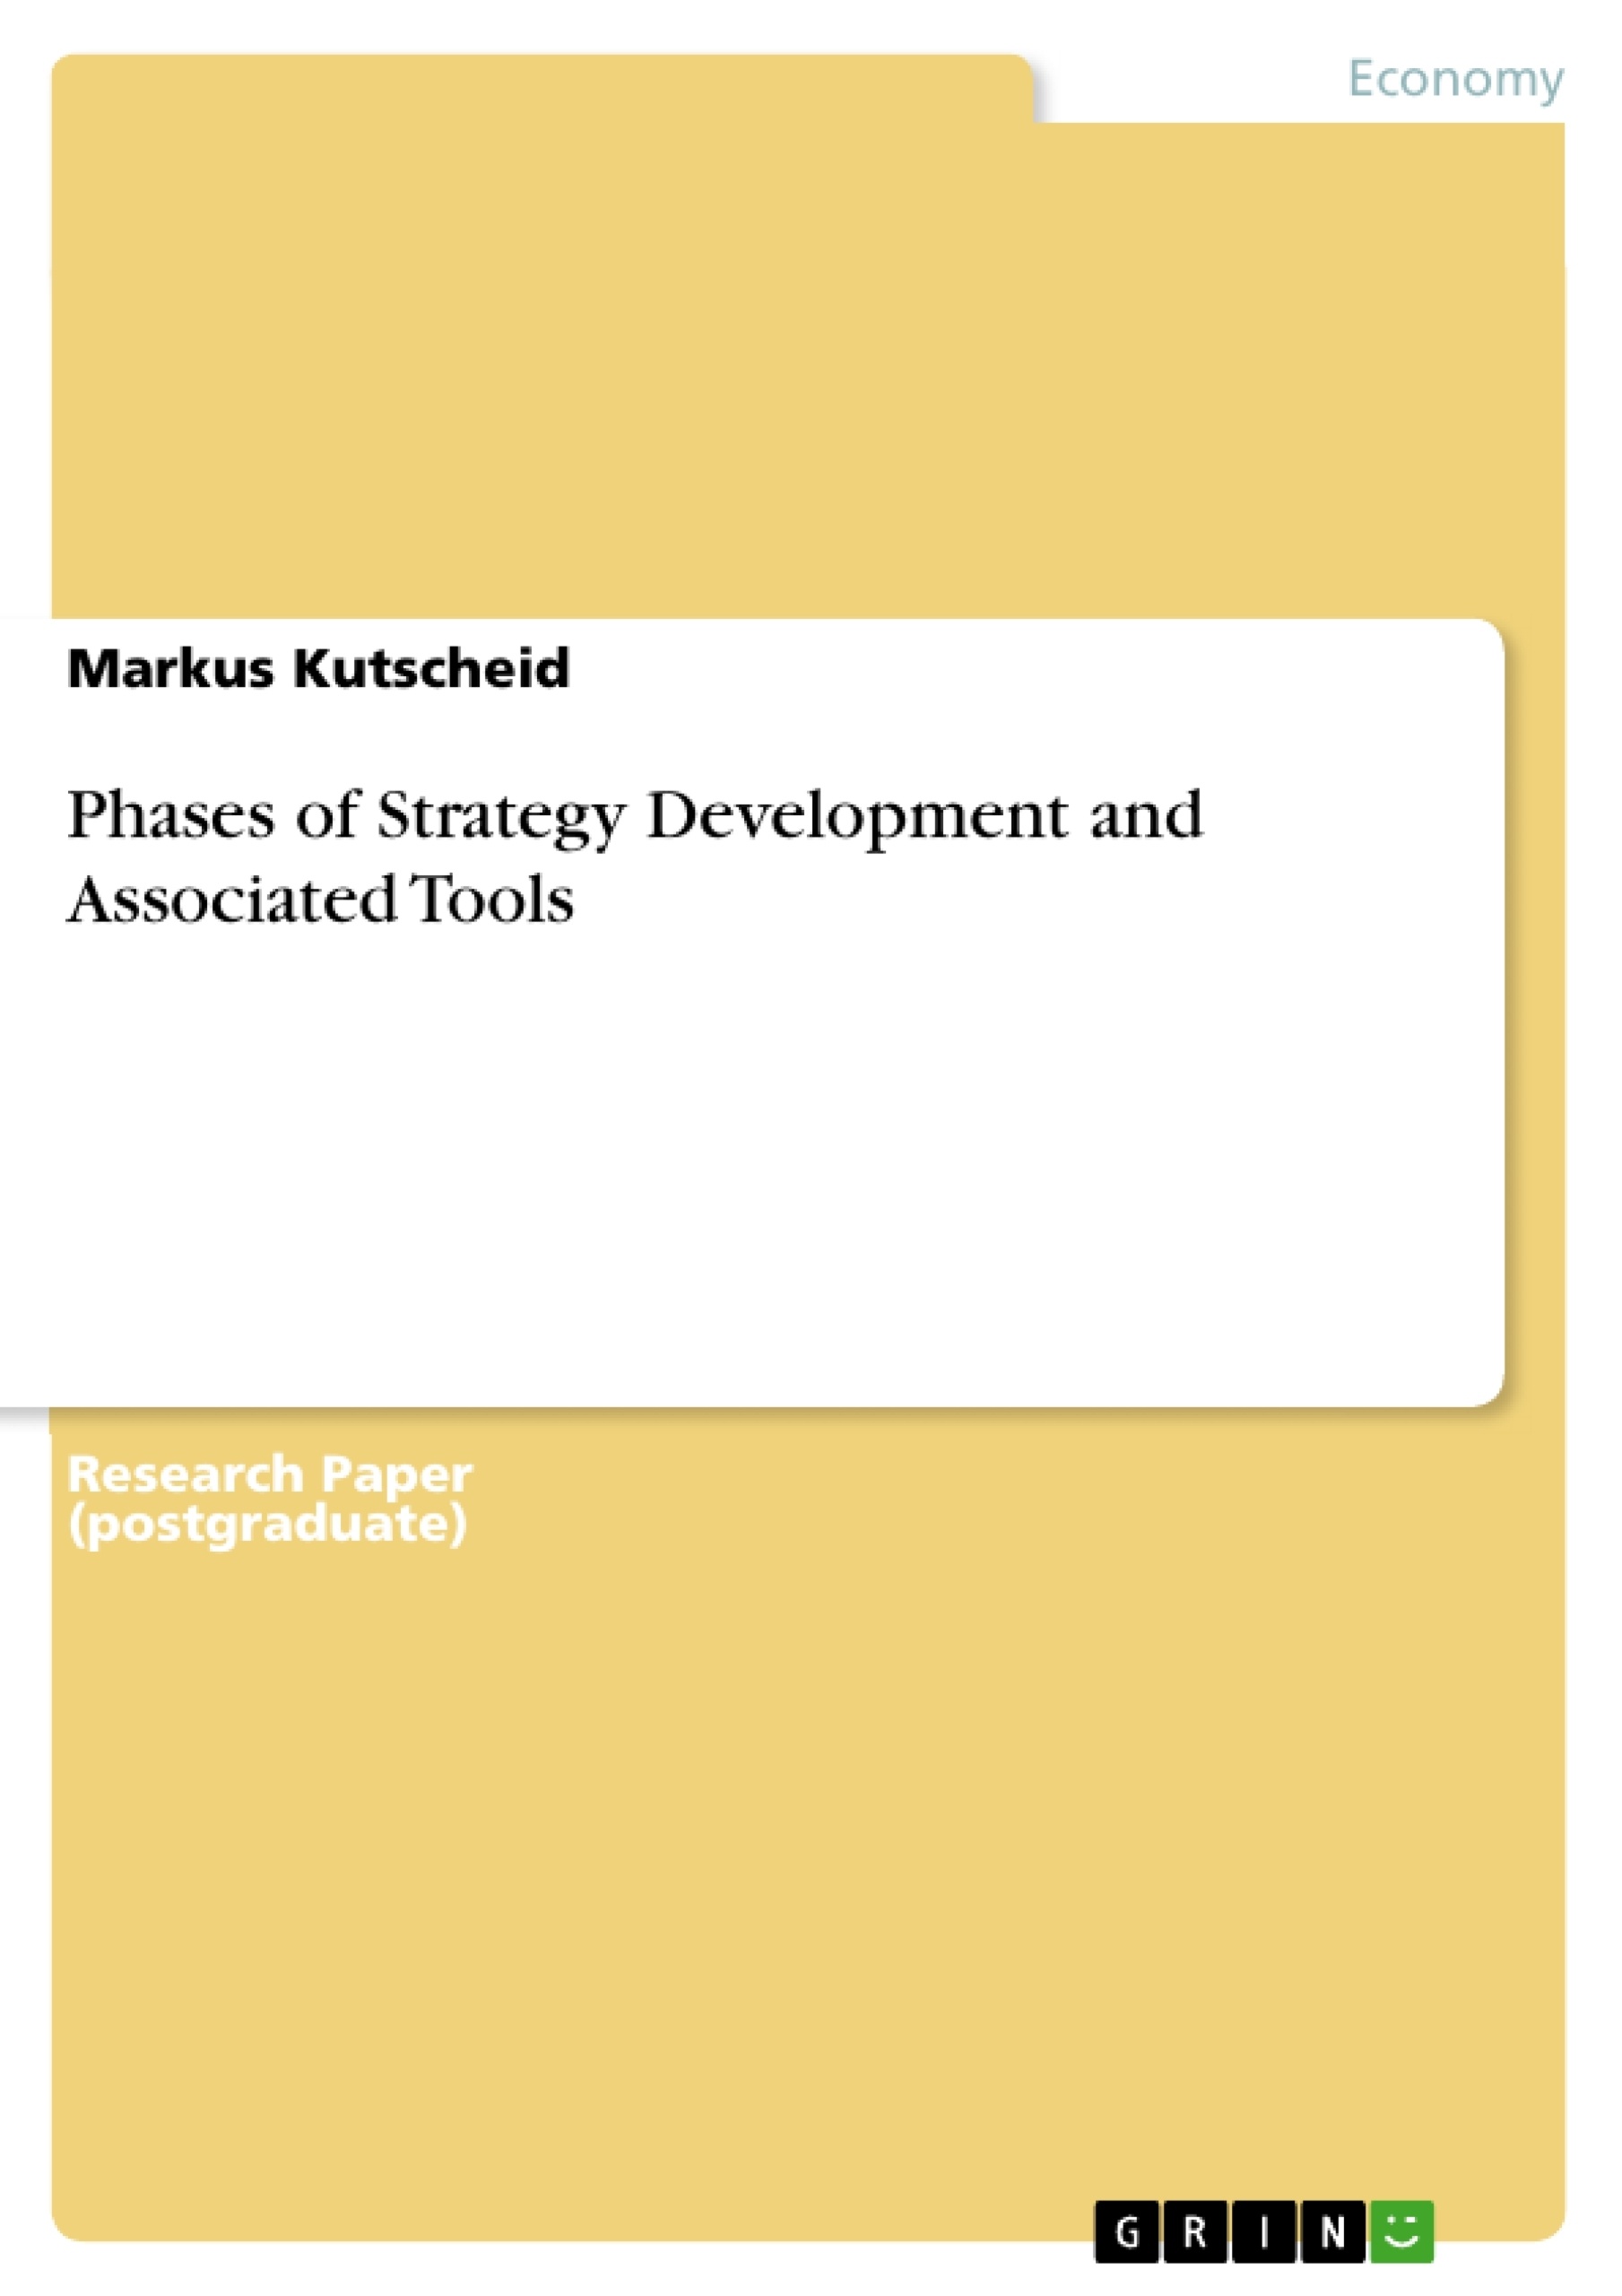 Title: Phases of Strategy Development and Associated Tools